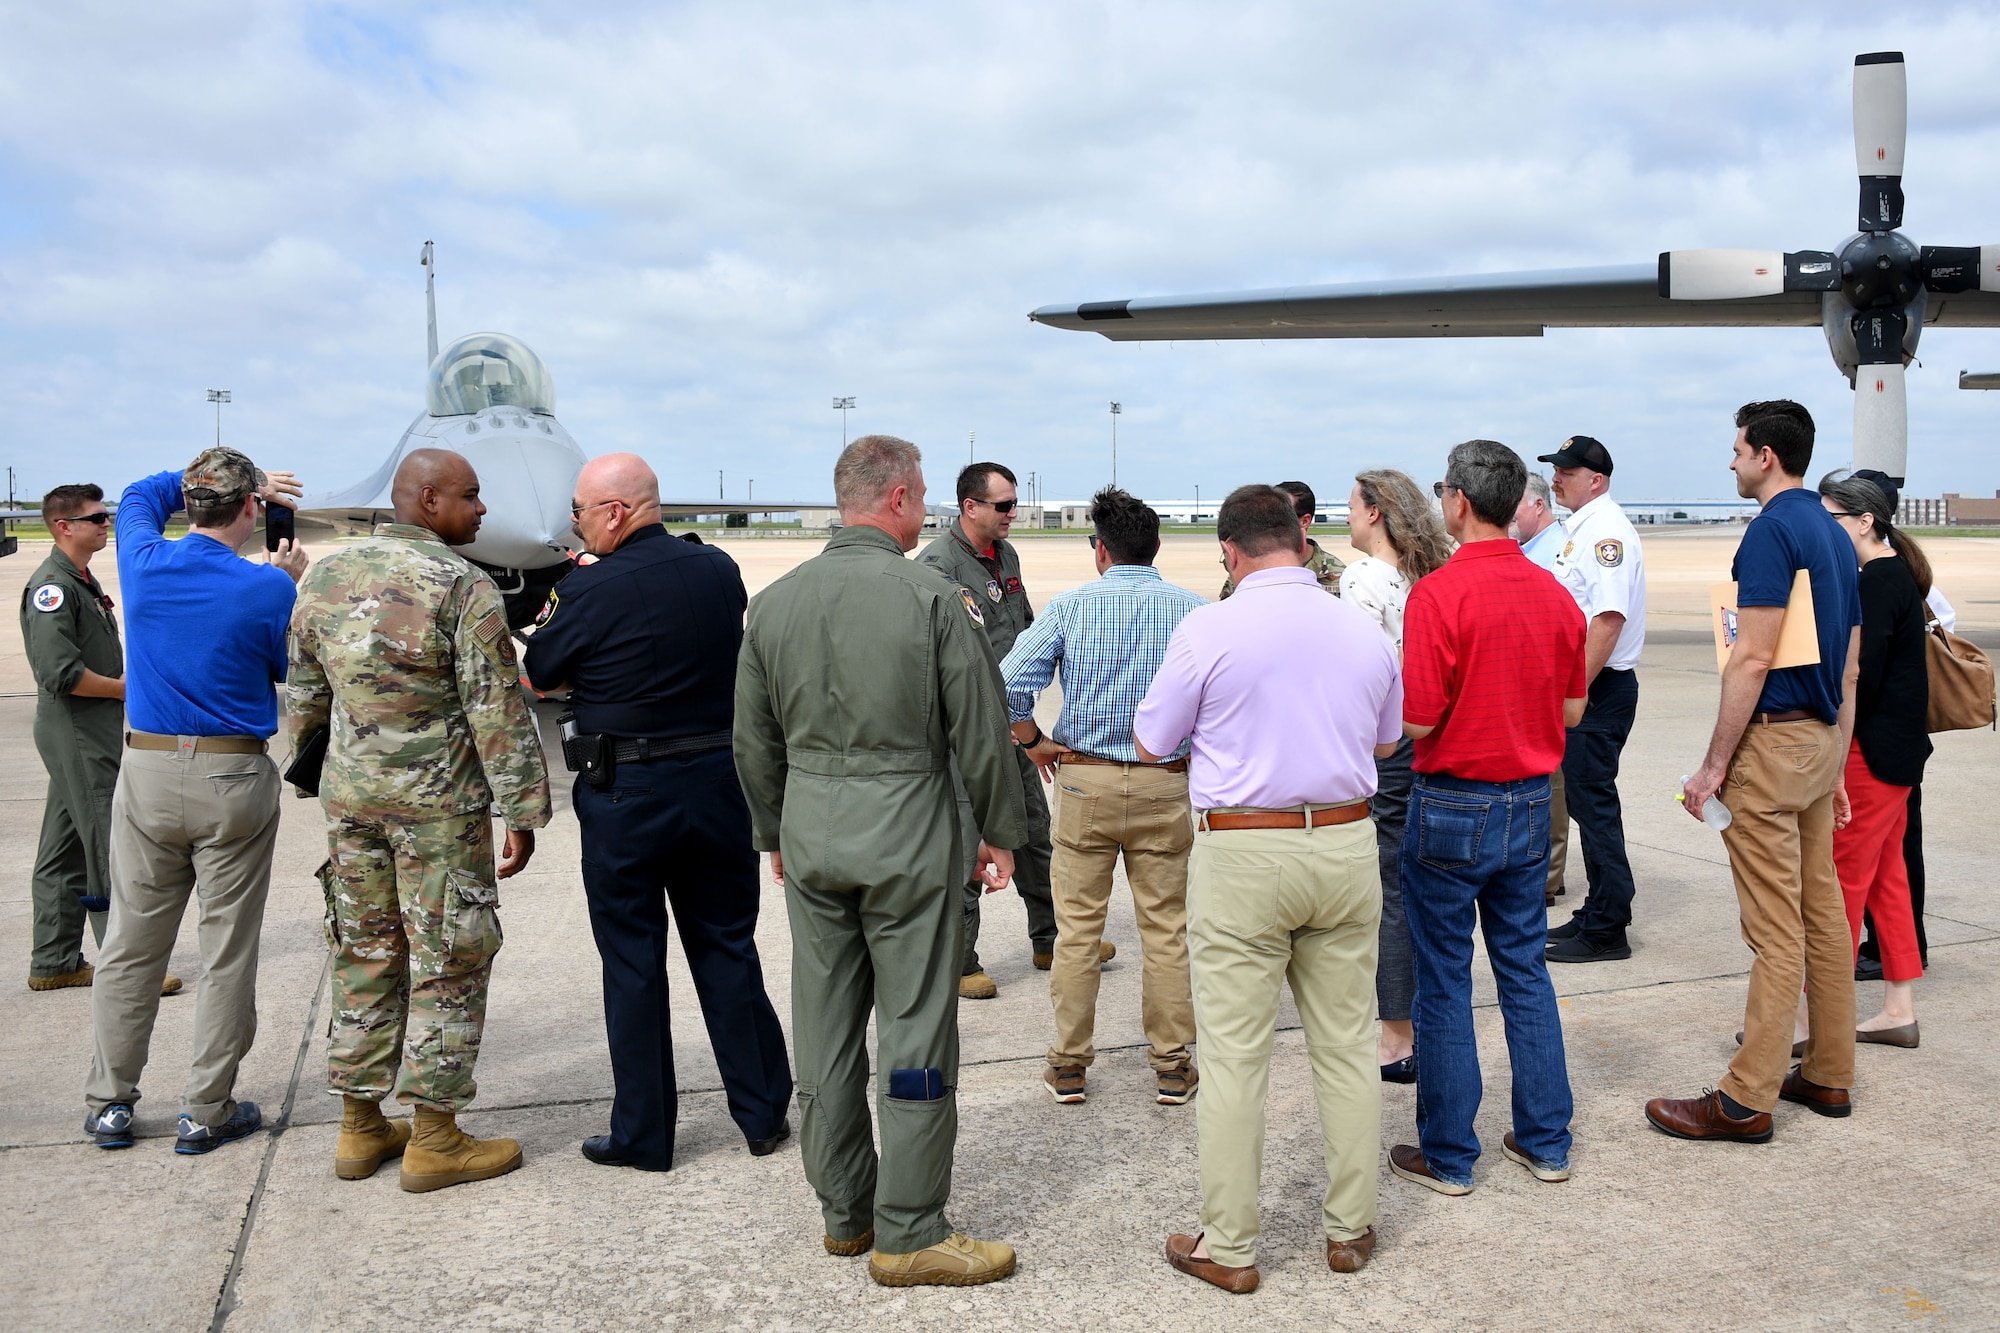 Civic leaders from the Dallas/Fort Worth area listen to (center) Col. Korey “Axe” Amundson, 301st Fighter Wing vice commander, share the 301 FW mission on June 11, 2021, at U.S. Naval Air Station Joint Reserve Base Fort Worth, Texas. The Civic Leader Day event hosted approximately 70 civilians to help them gain insight into the 301 FW's mission to train and deploy combat-ready Airmen. (U.S. Air Force photo by Staff Sgt. Randall Moose)